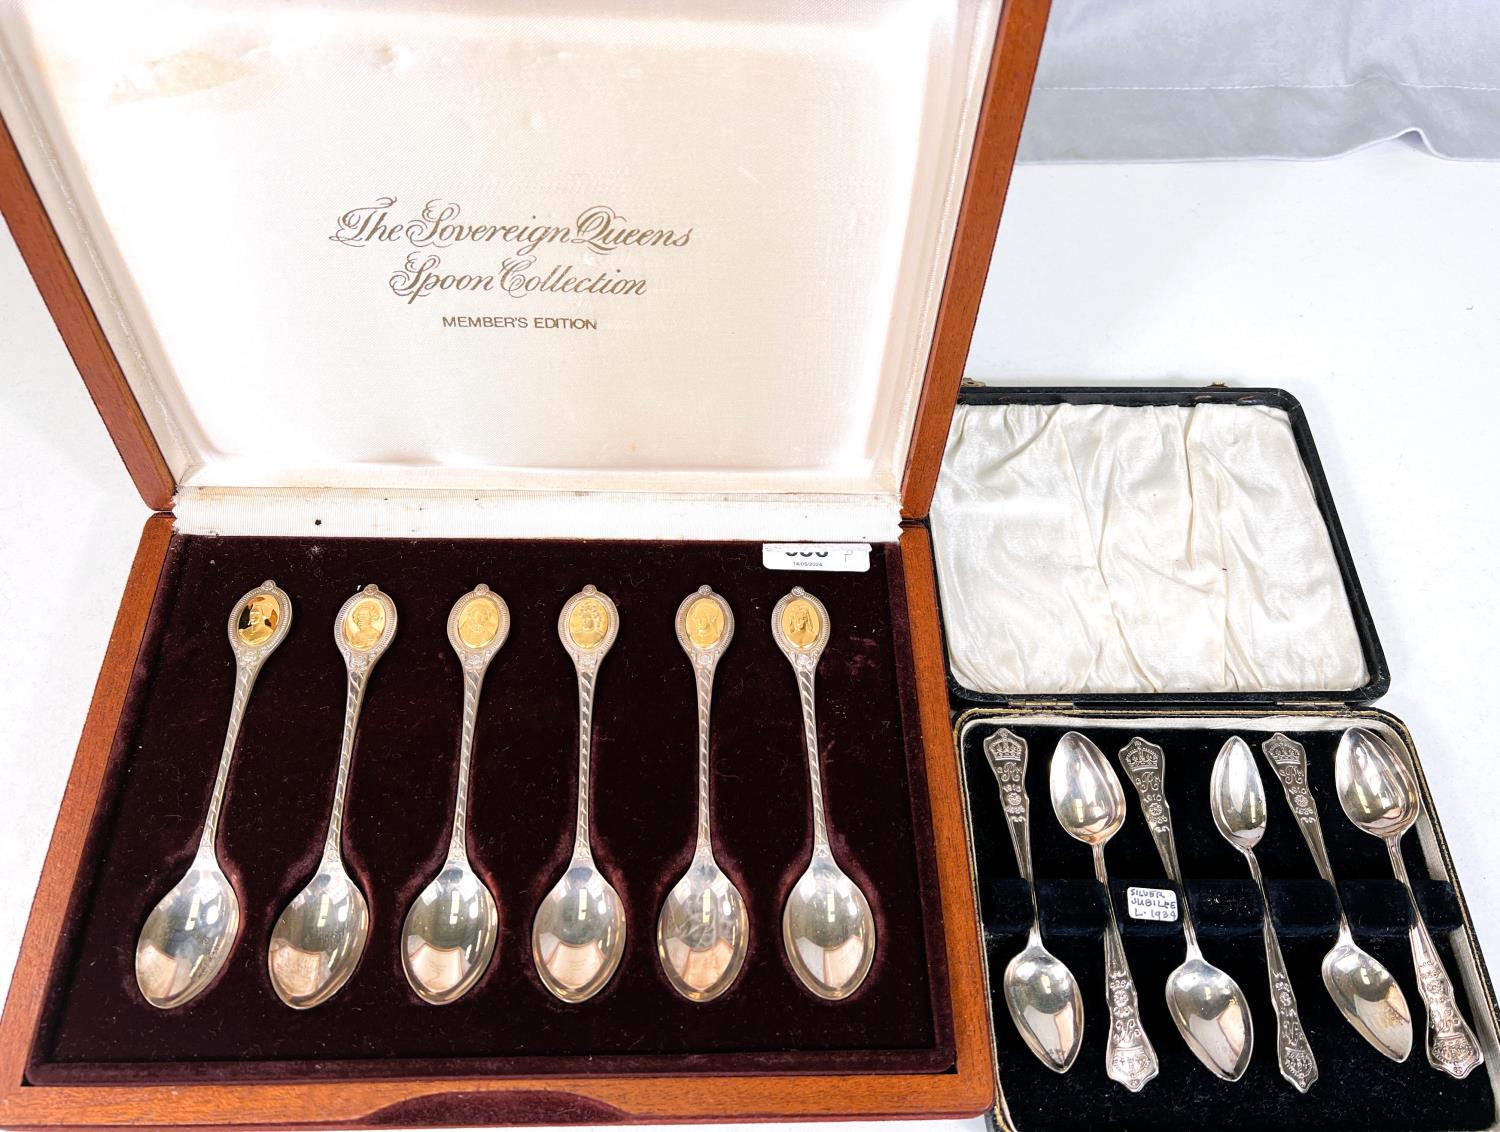 A cased set of 6 hallmarked silver teaspoons "The Sovereign Queens Spoon Collection" Sheffield 1977;